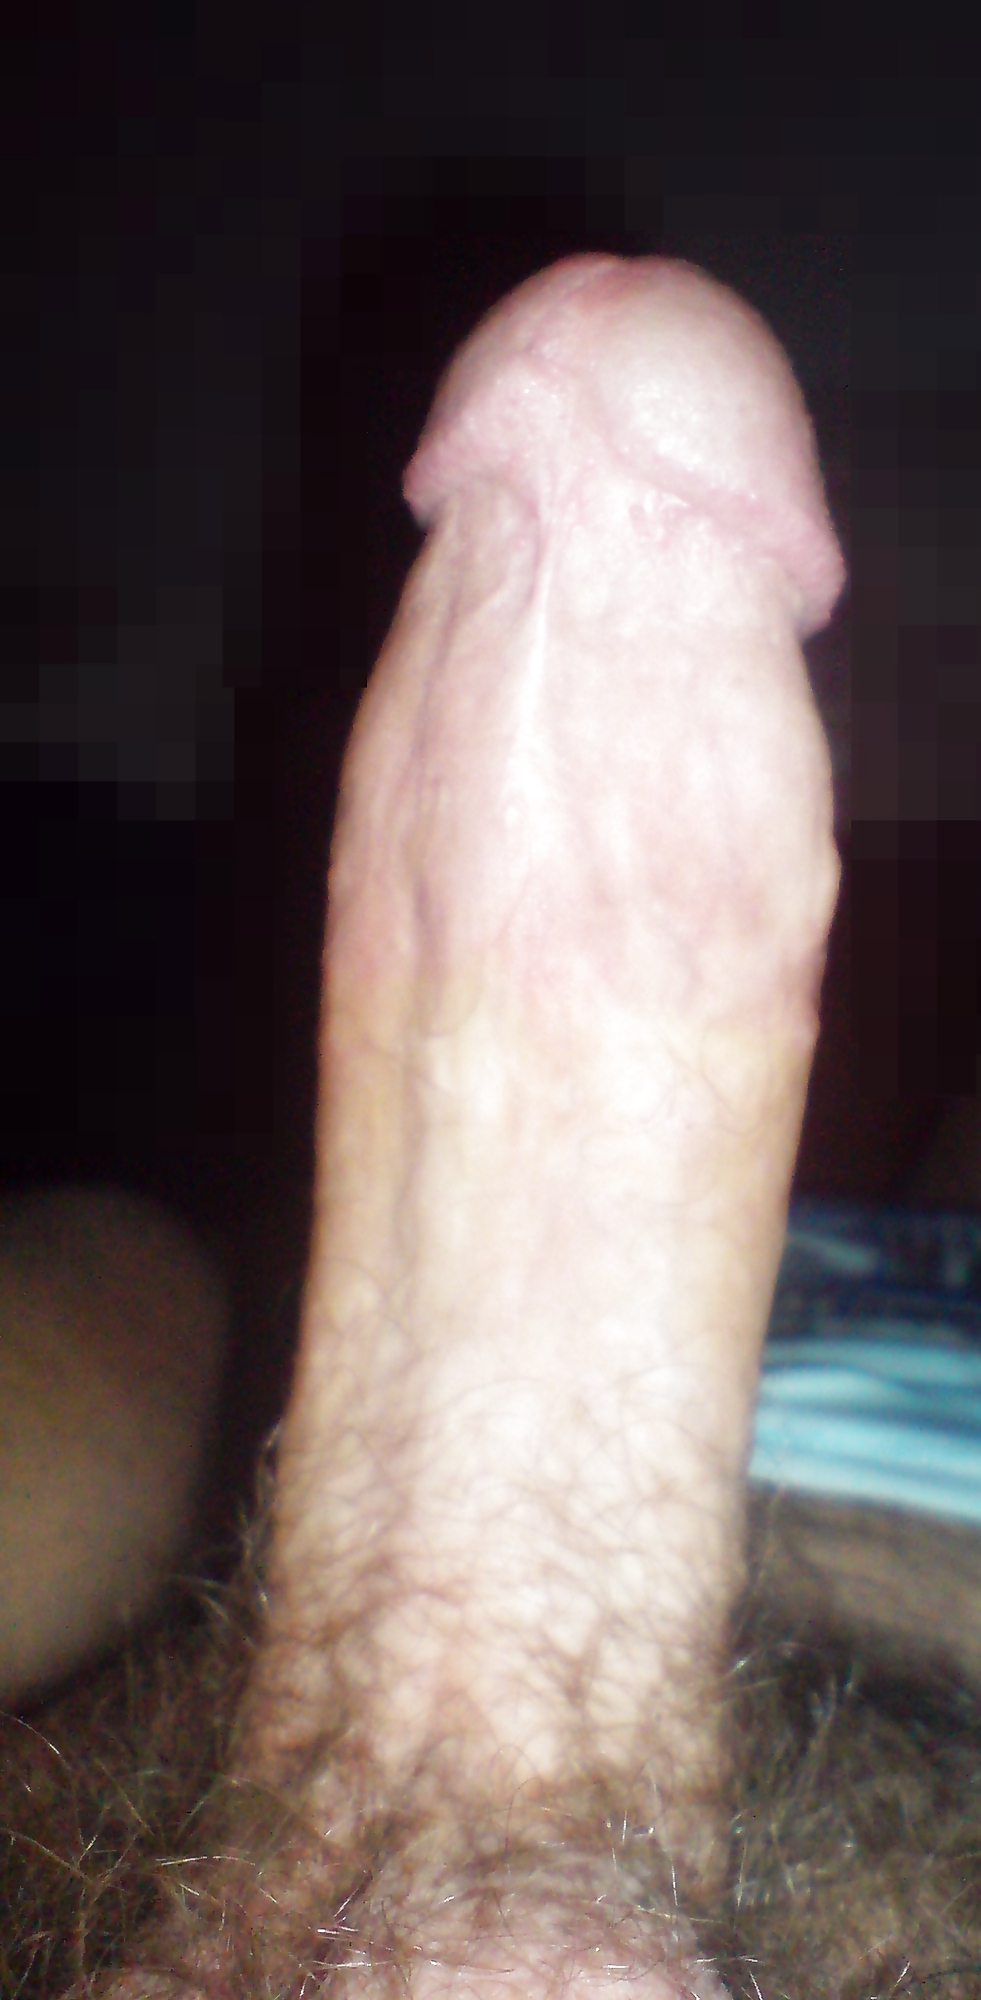 Ladys, little more of my cock for you #22596295